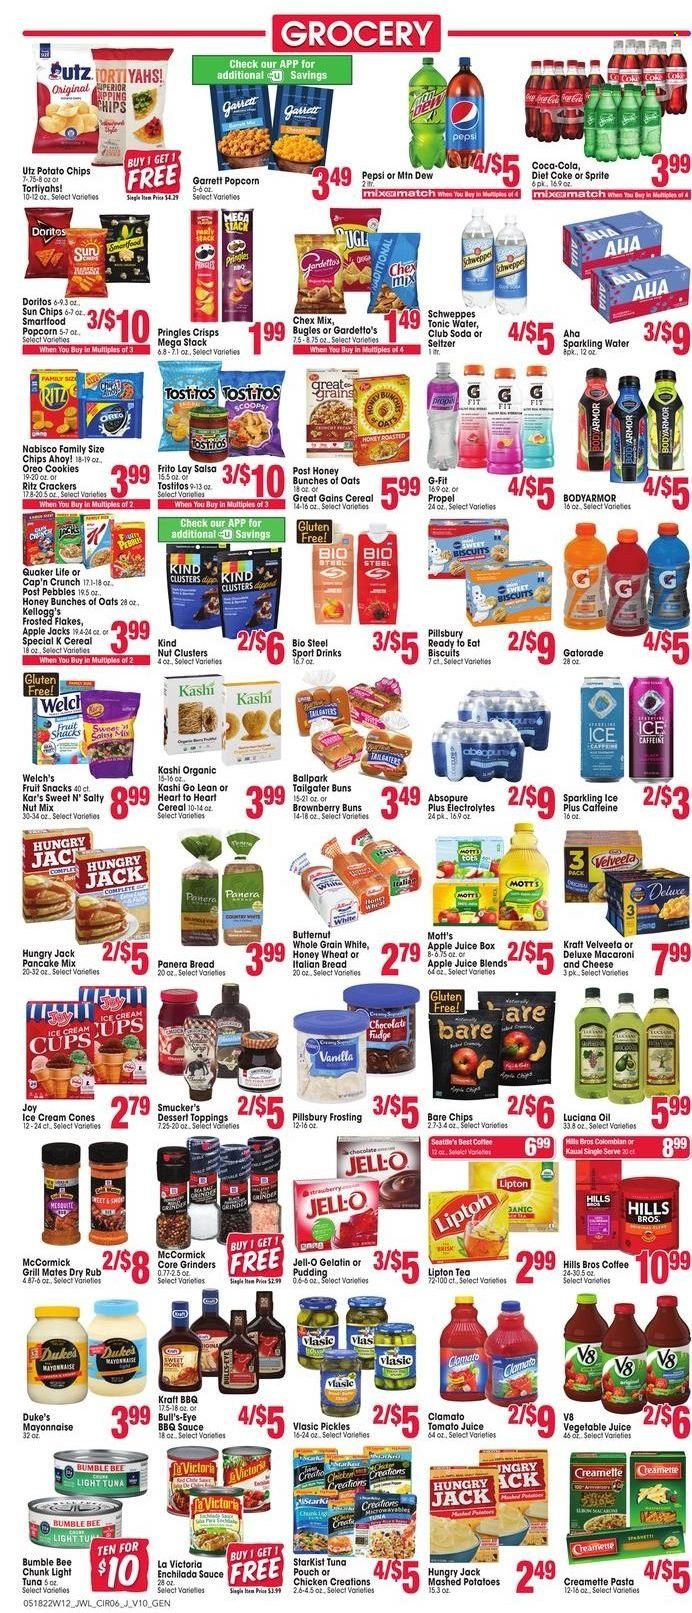 thumbnail - Jewel Osco Flyer - 05/18/2022 - 05/24/2022 - Sales products - bread, pie, buns, Welch's, Mott's, tuna, StarKist, mashed potatoes, macaroni, pasta, Bumble Bee, sauce, pancakes, Pillsbury, Quaker, Kraft®, pudding, Oreo, mayonnaise, ice cream, cookies, fudge, crackers, Kellogg's, biscuit, fruit snack, Chips Ahoy!, RITZ, Doritos, potato chips, Pringles, chips, Smartfood, popcorn, Tostitos, Chex Mix, frosting, Jell-O, enchilada sauce, pickles, light tuna, cereals, Cap'n Crunch, Frosted Flakes, Creamette, BBQ sauce, salsa, oil, apple juice, Coca-Cola, Mountain Dew, Schweppes, Sprite, tomato juice, Pepsi, juice, Lipton, tonic, Diet Coke, Clamato, vegetable juice, Gatorade, Club Soda, seltzer water, sparkling water, tea, coffee, Joy, cup, Hill's, butternut squash. Page 6.